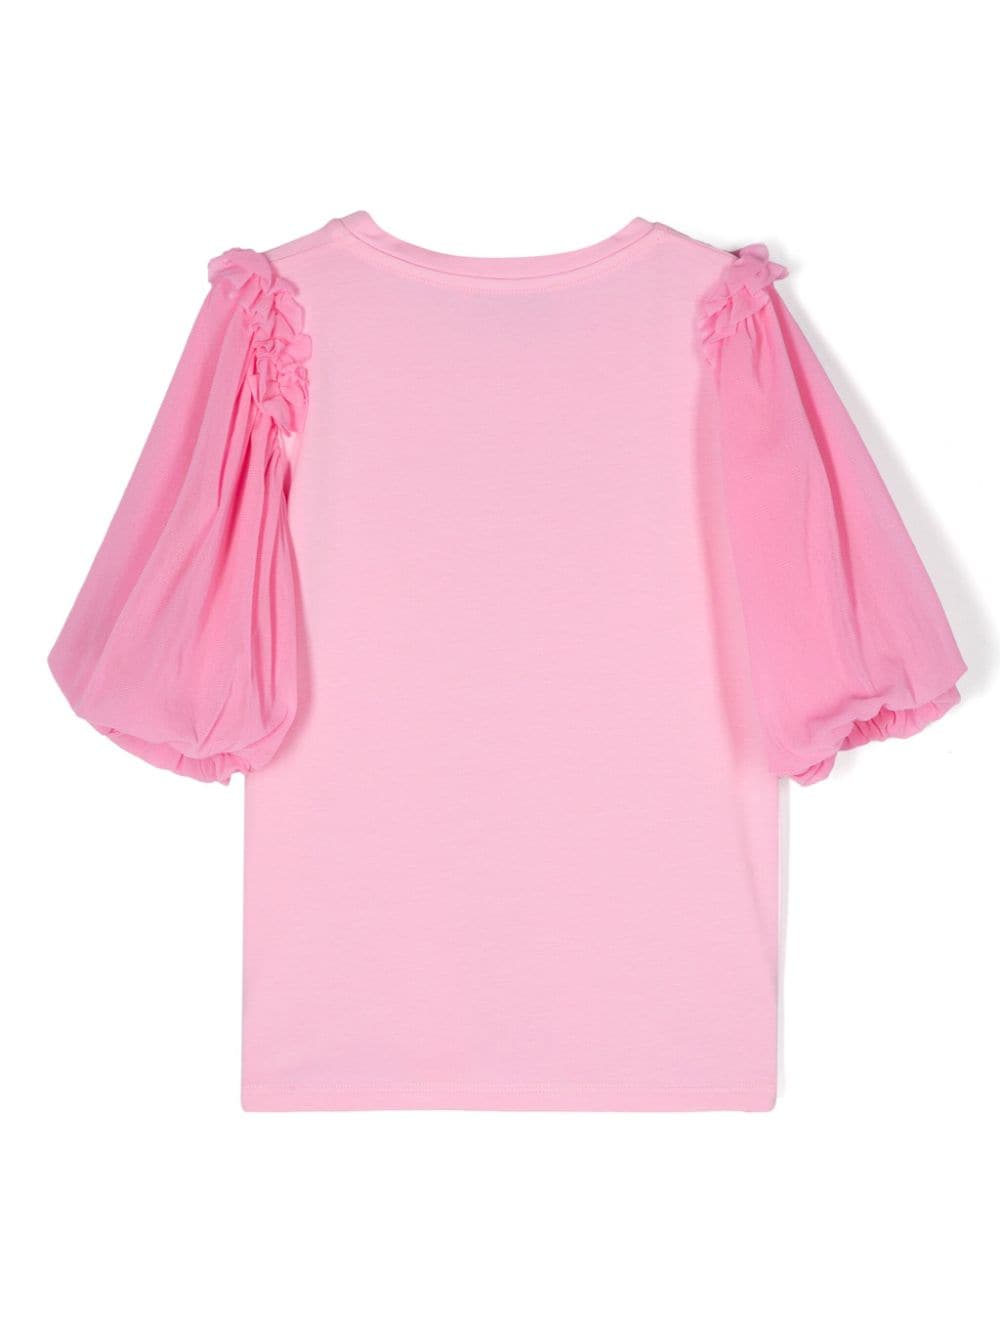 Pink t-shirt for girls with logo